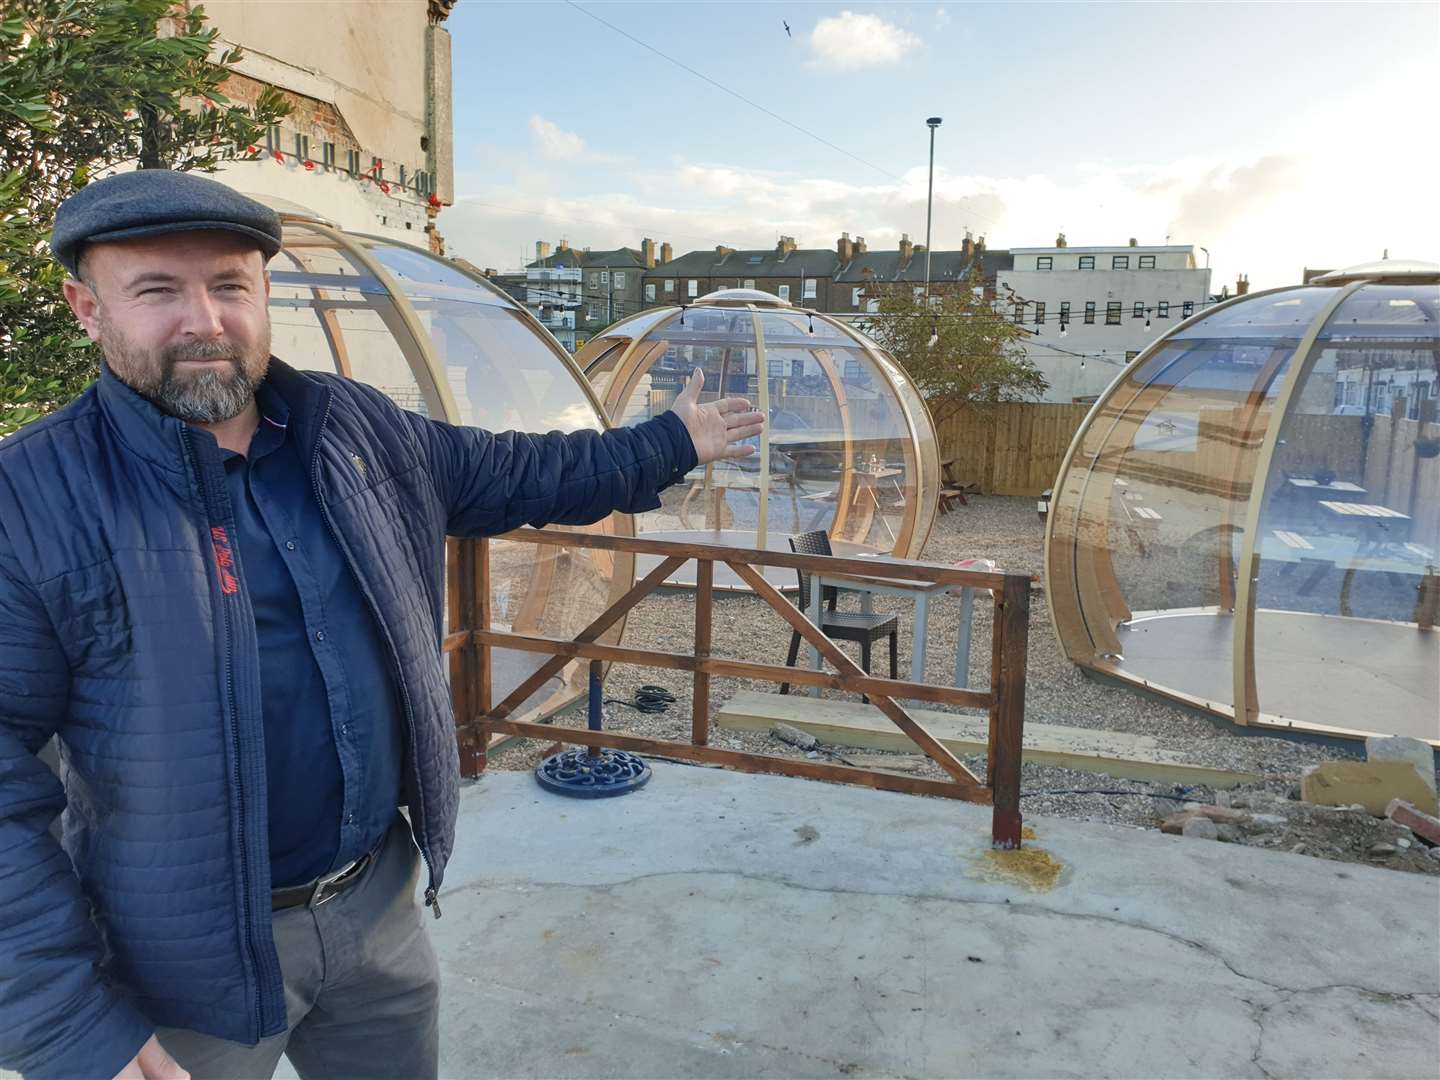 A La Turka owner Mehmet Dari unveiling the outside seating bubbles due to launch in Herne Bay